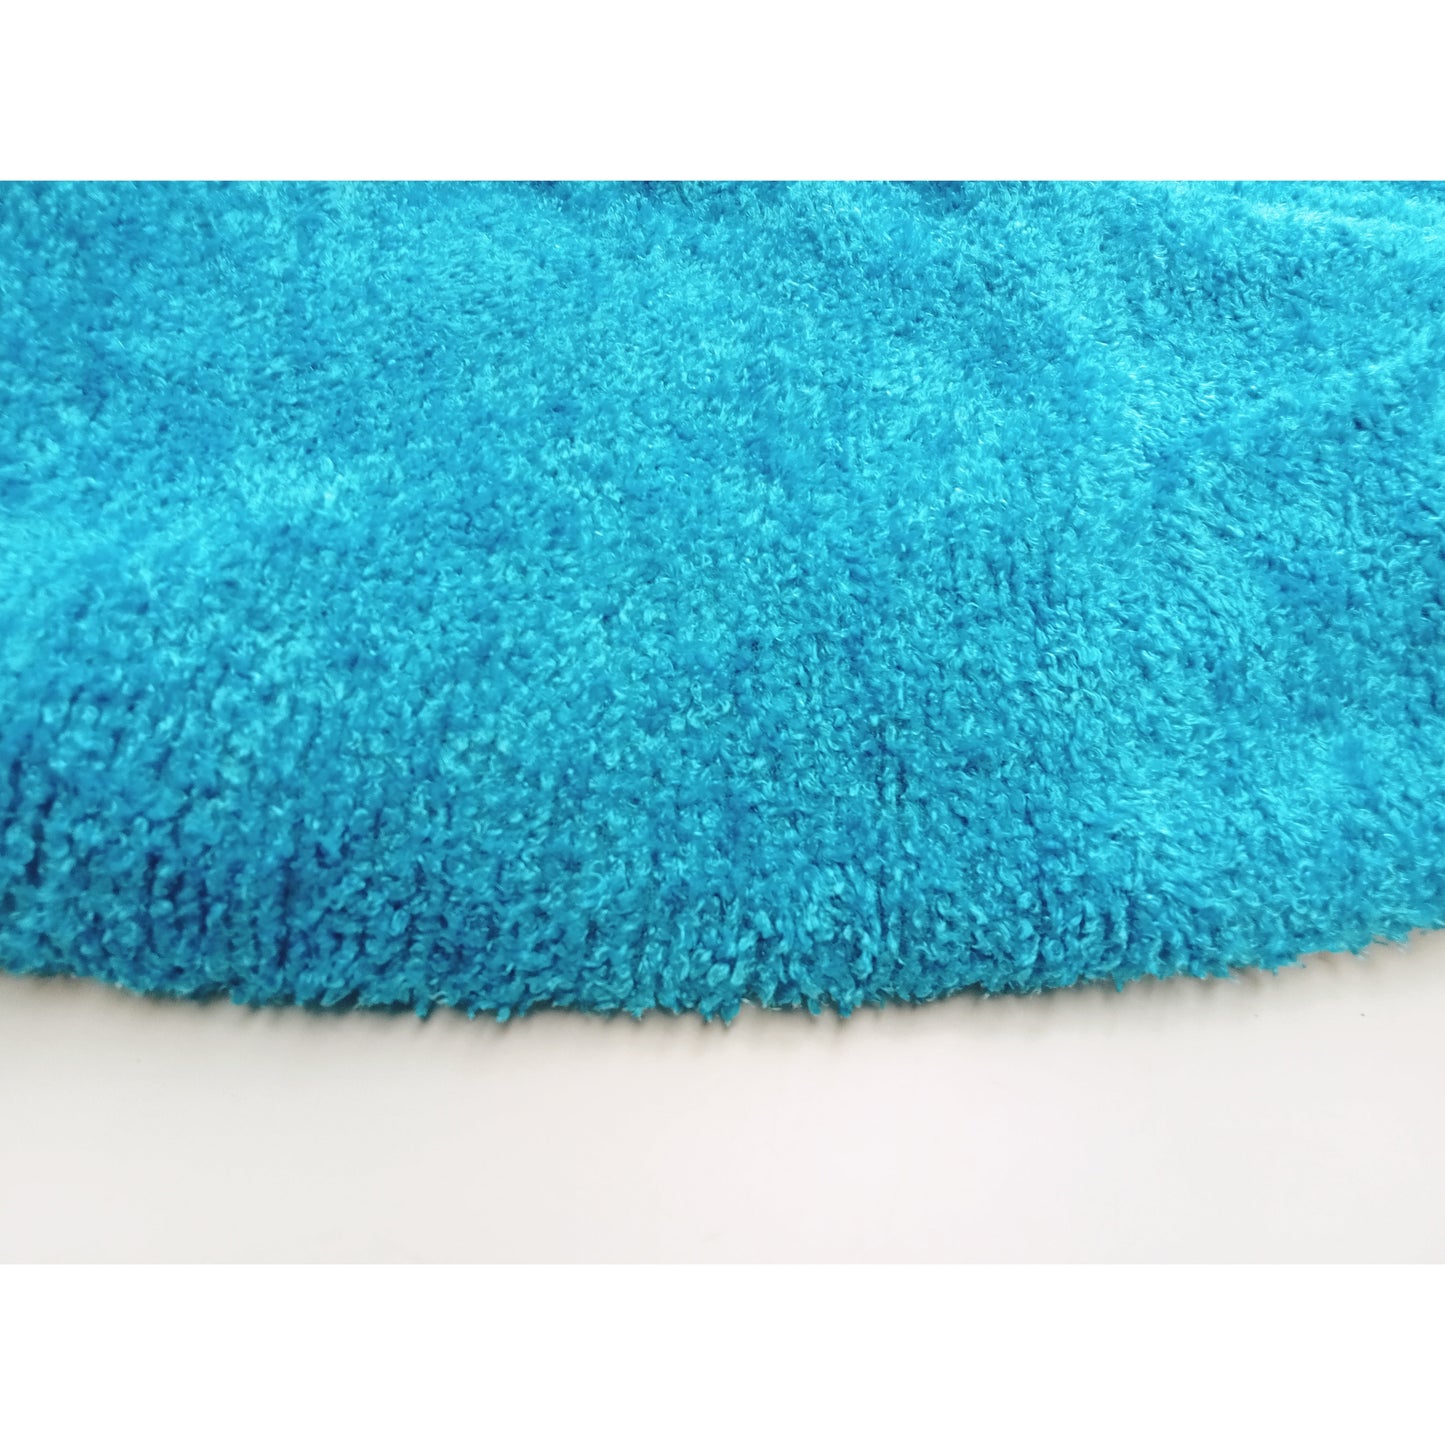 Teal boucle knit